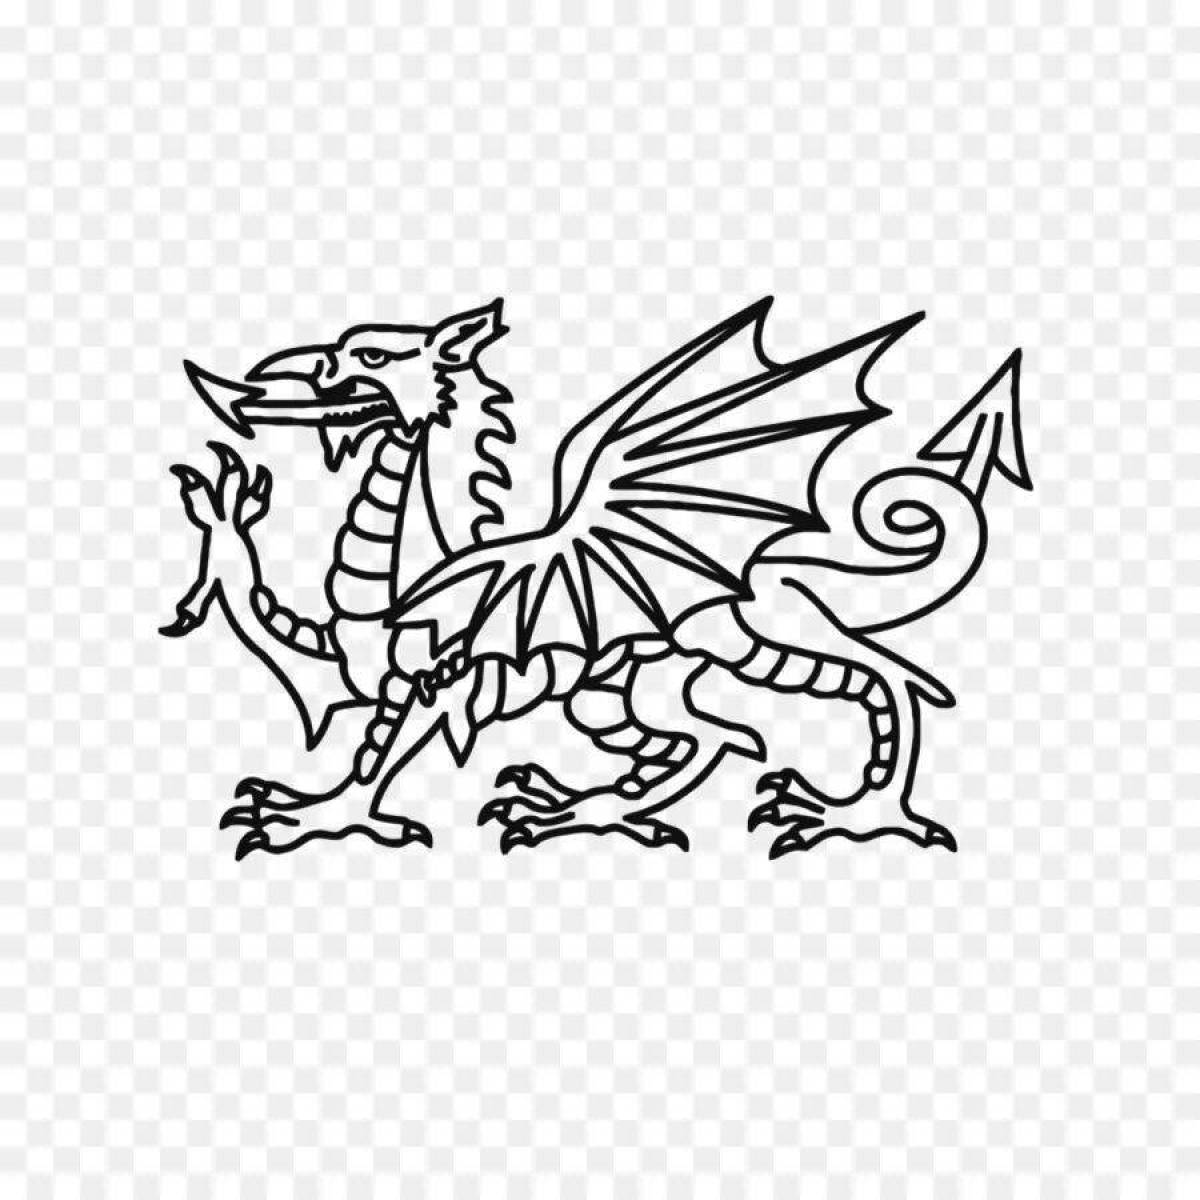 Brilliantly painted flag of wales